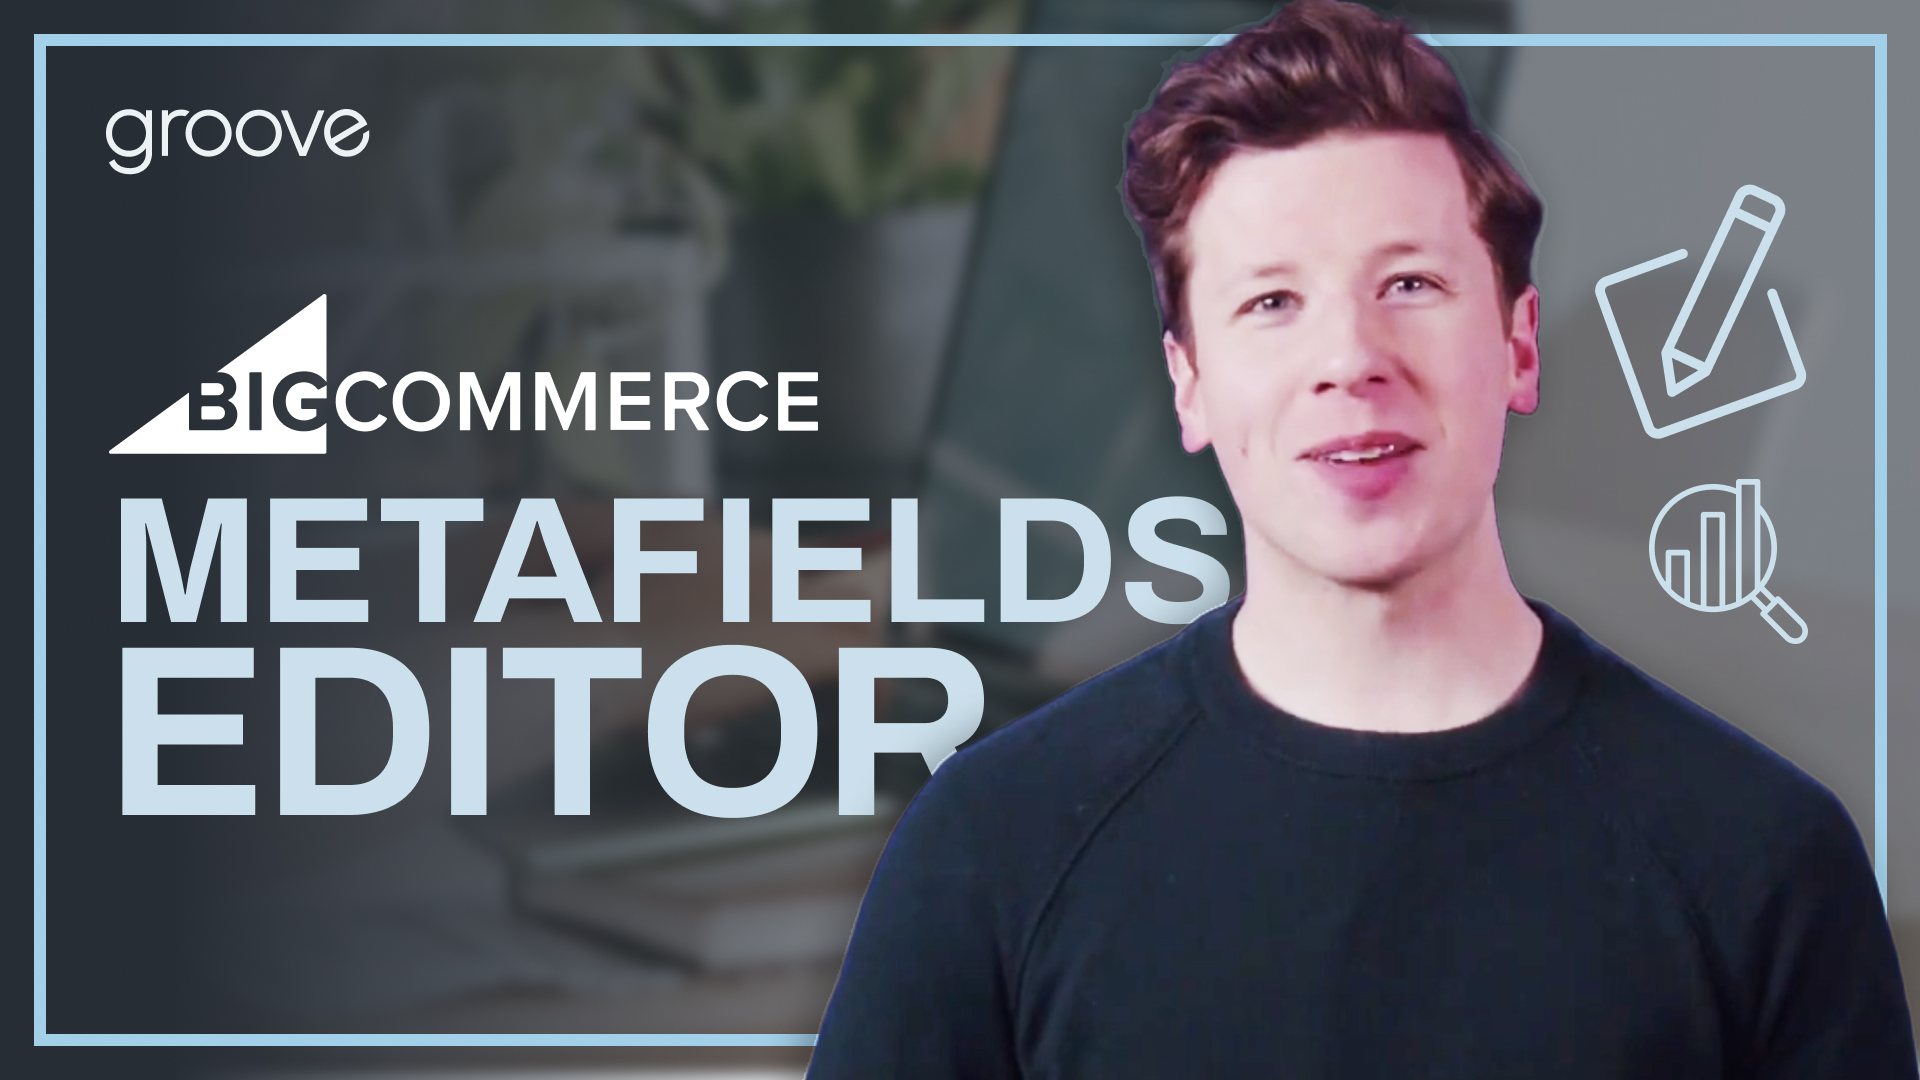 The BigCommerce Metafields Editor by Groove Commerce